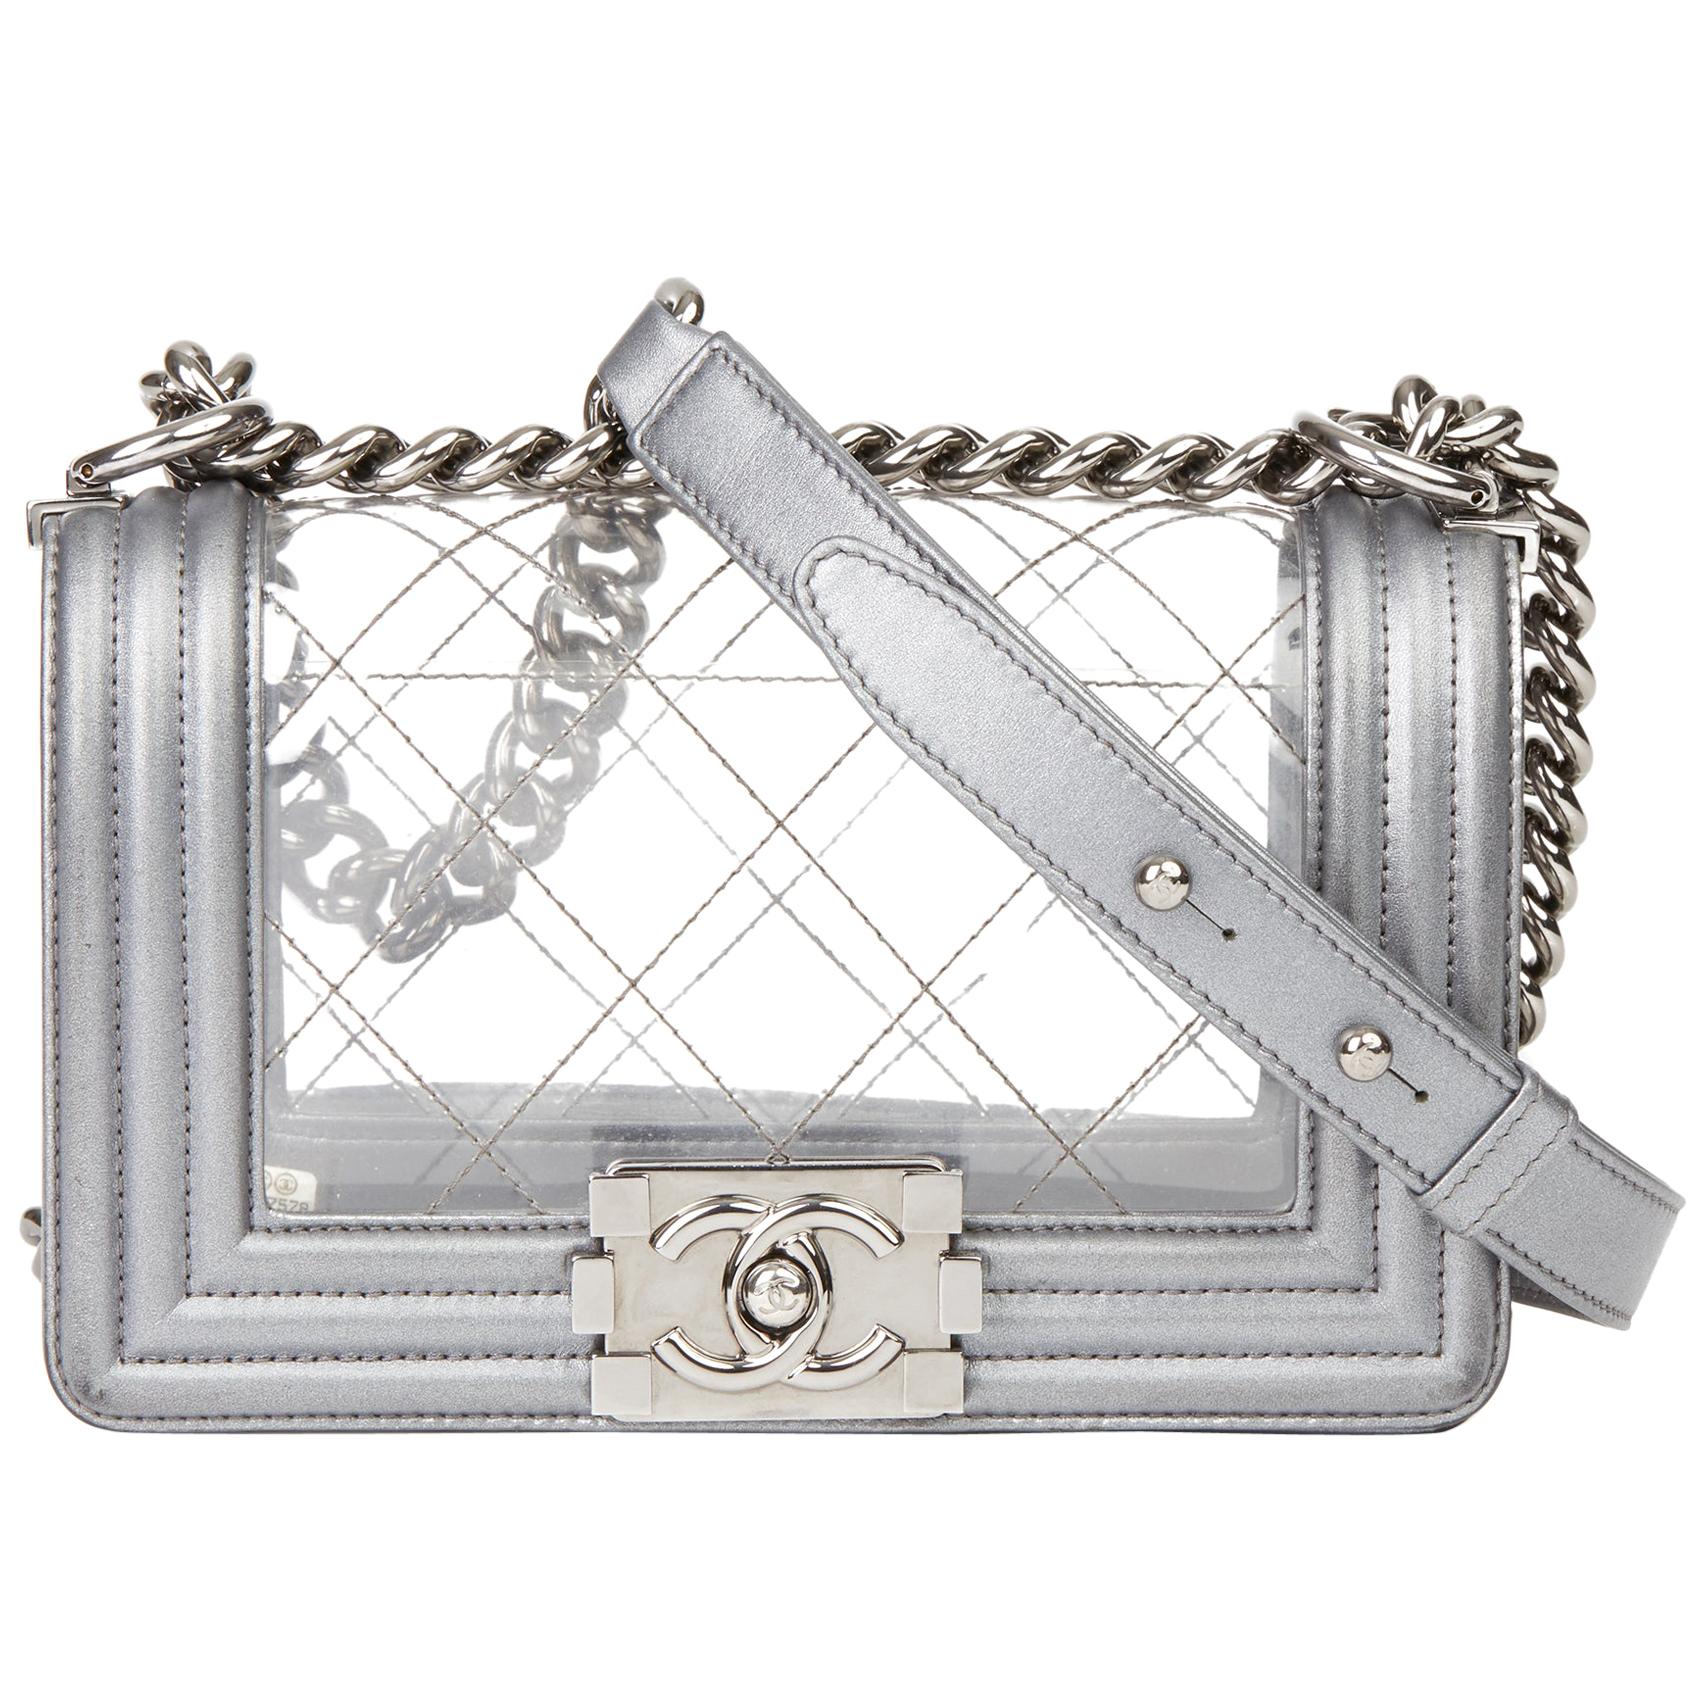 2014 Chanel Silver Metallic Calfskin Leather & Transparent PVC Naked Small Boy